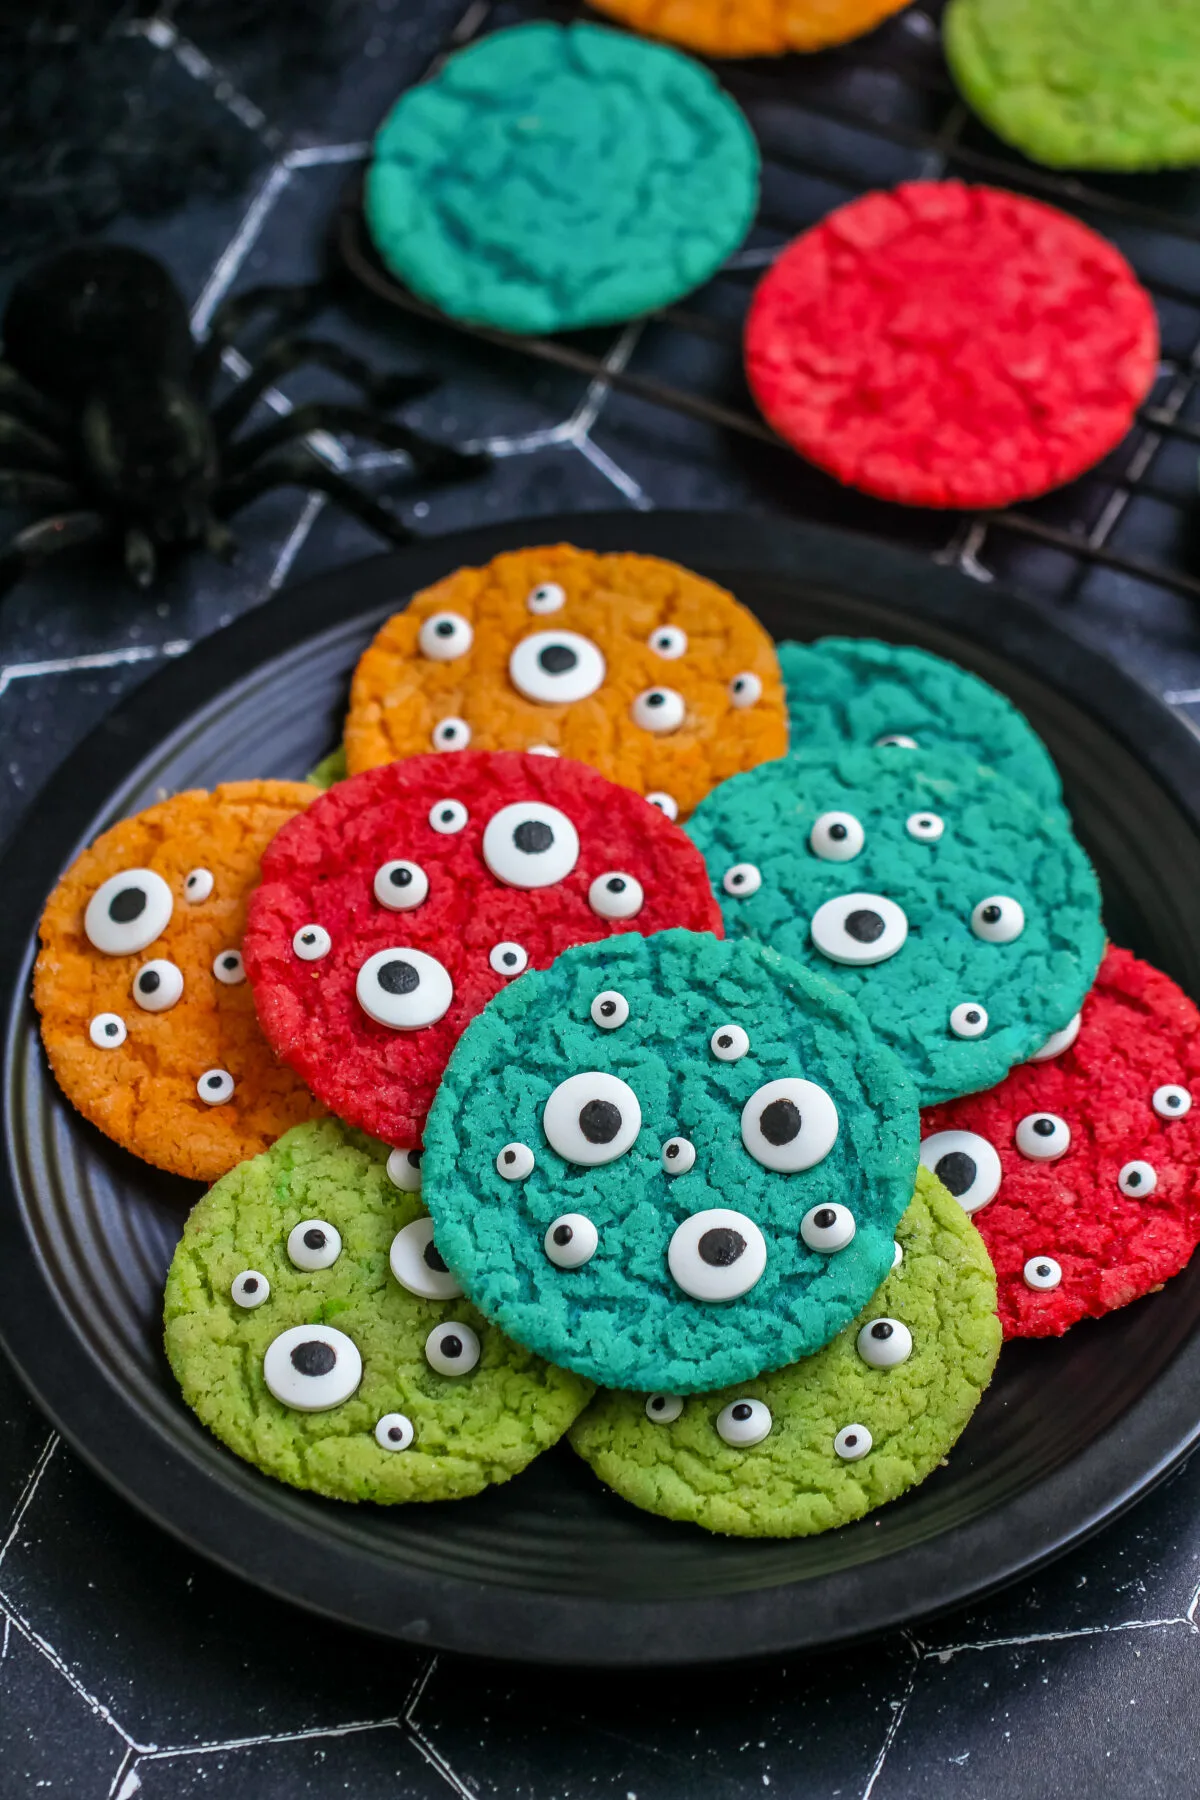 Learn how to make monster eye cookies with this recipe. Perfect for Halloween parties, these spooky treats are quick and easy to prepare!